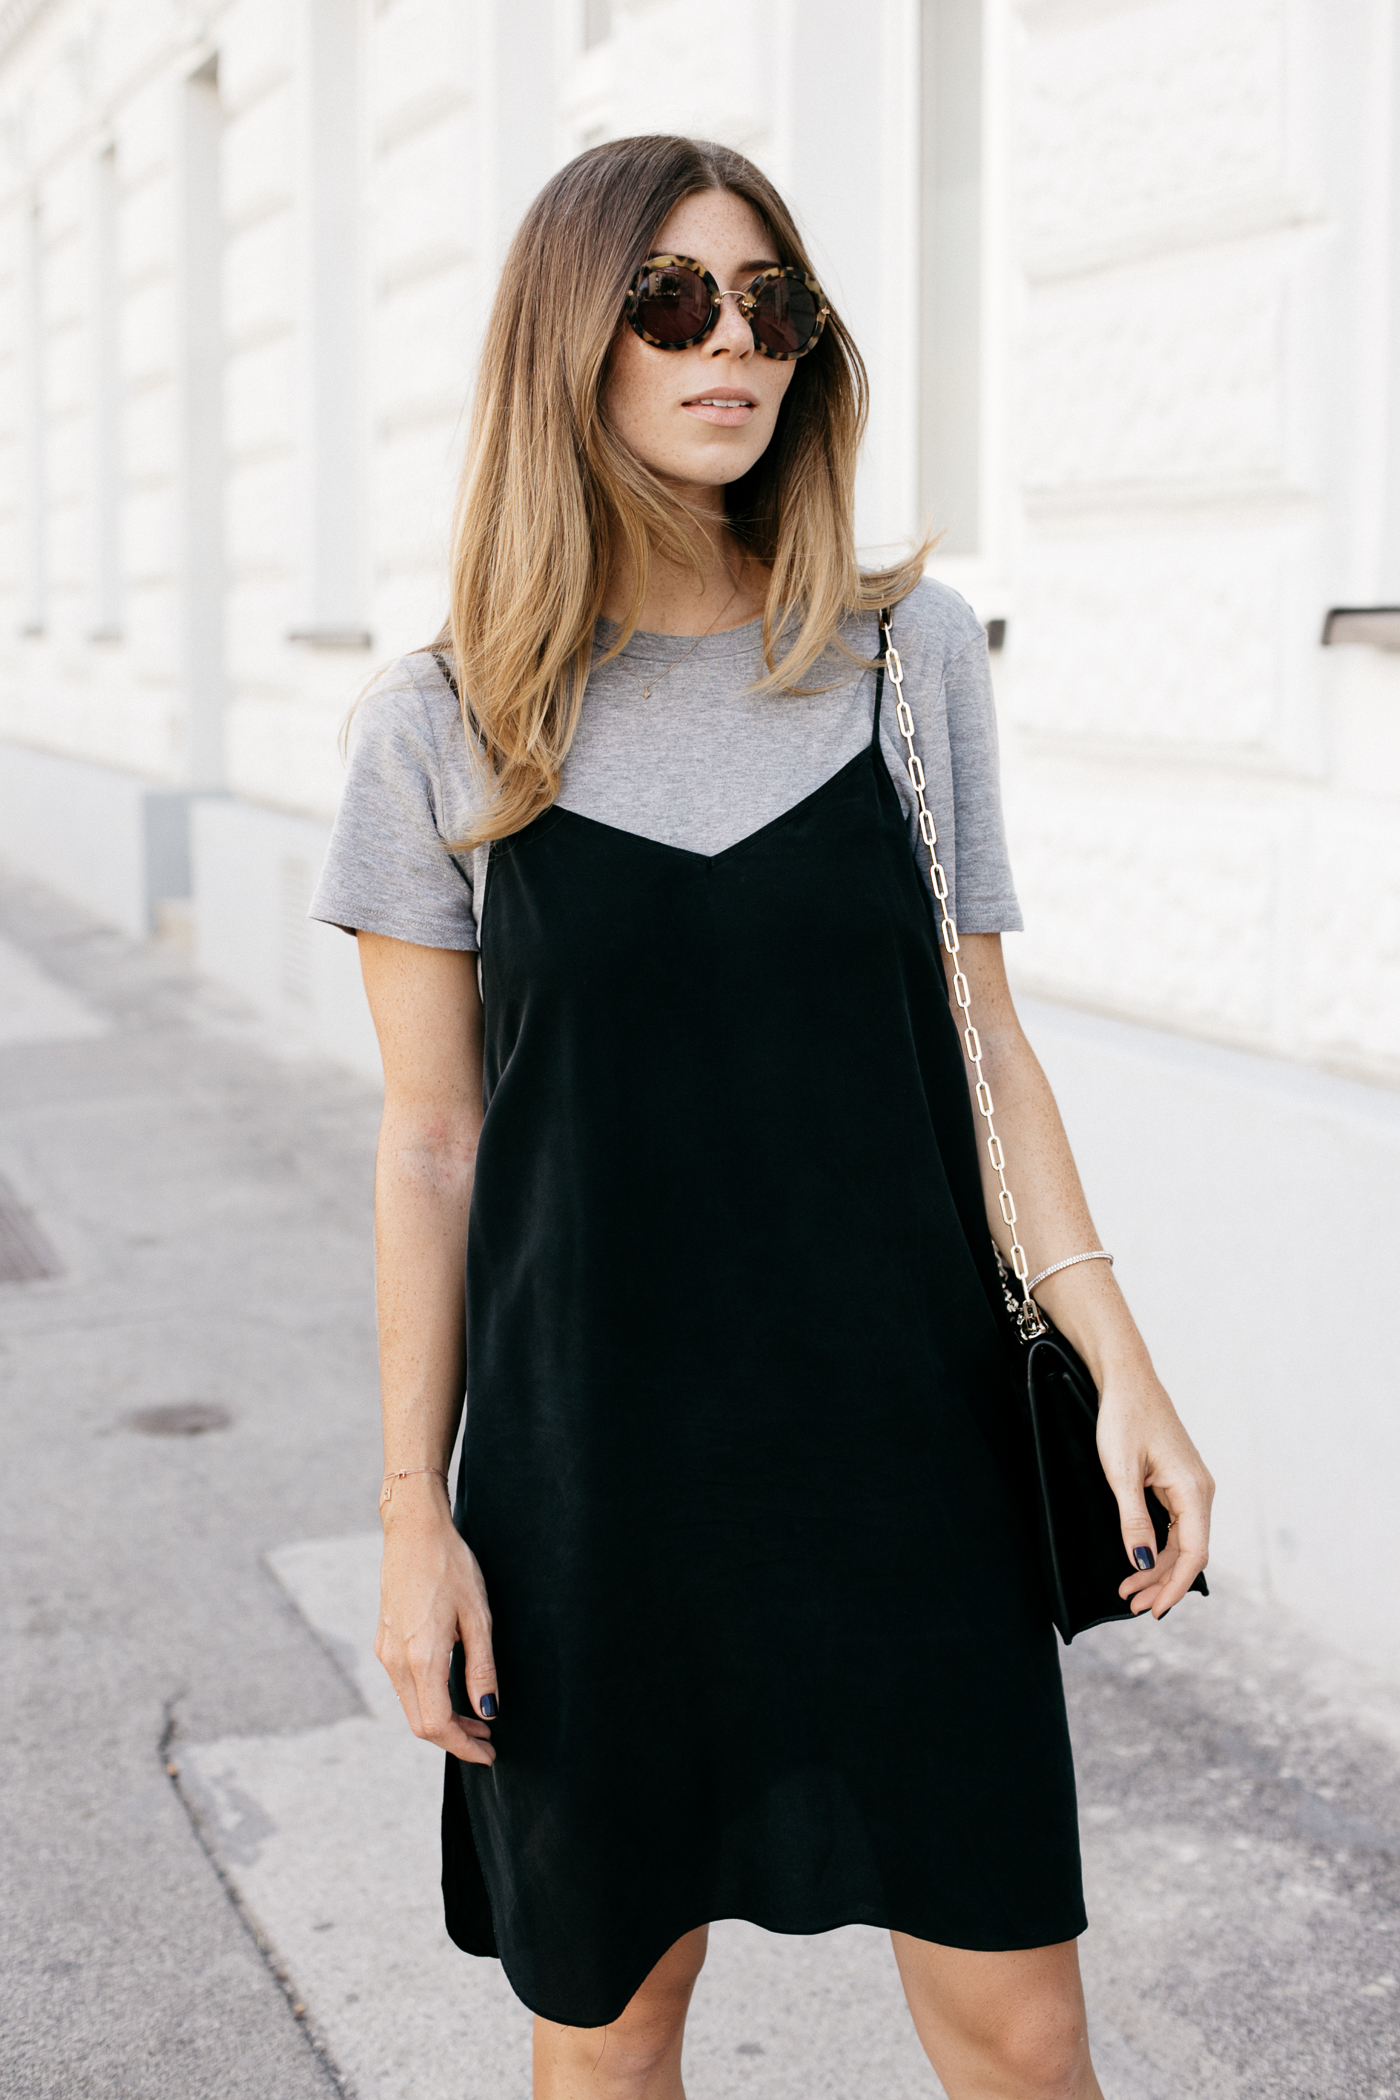 How to wear black in Summer? Editor's Pick - Love Daily Dose